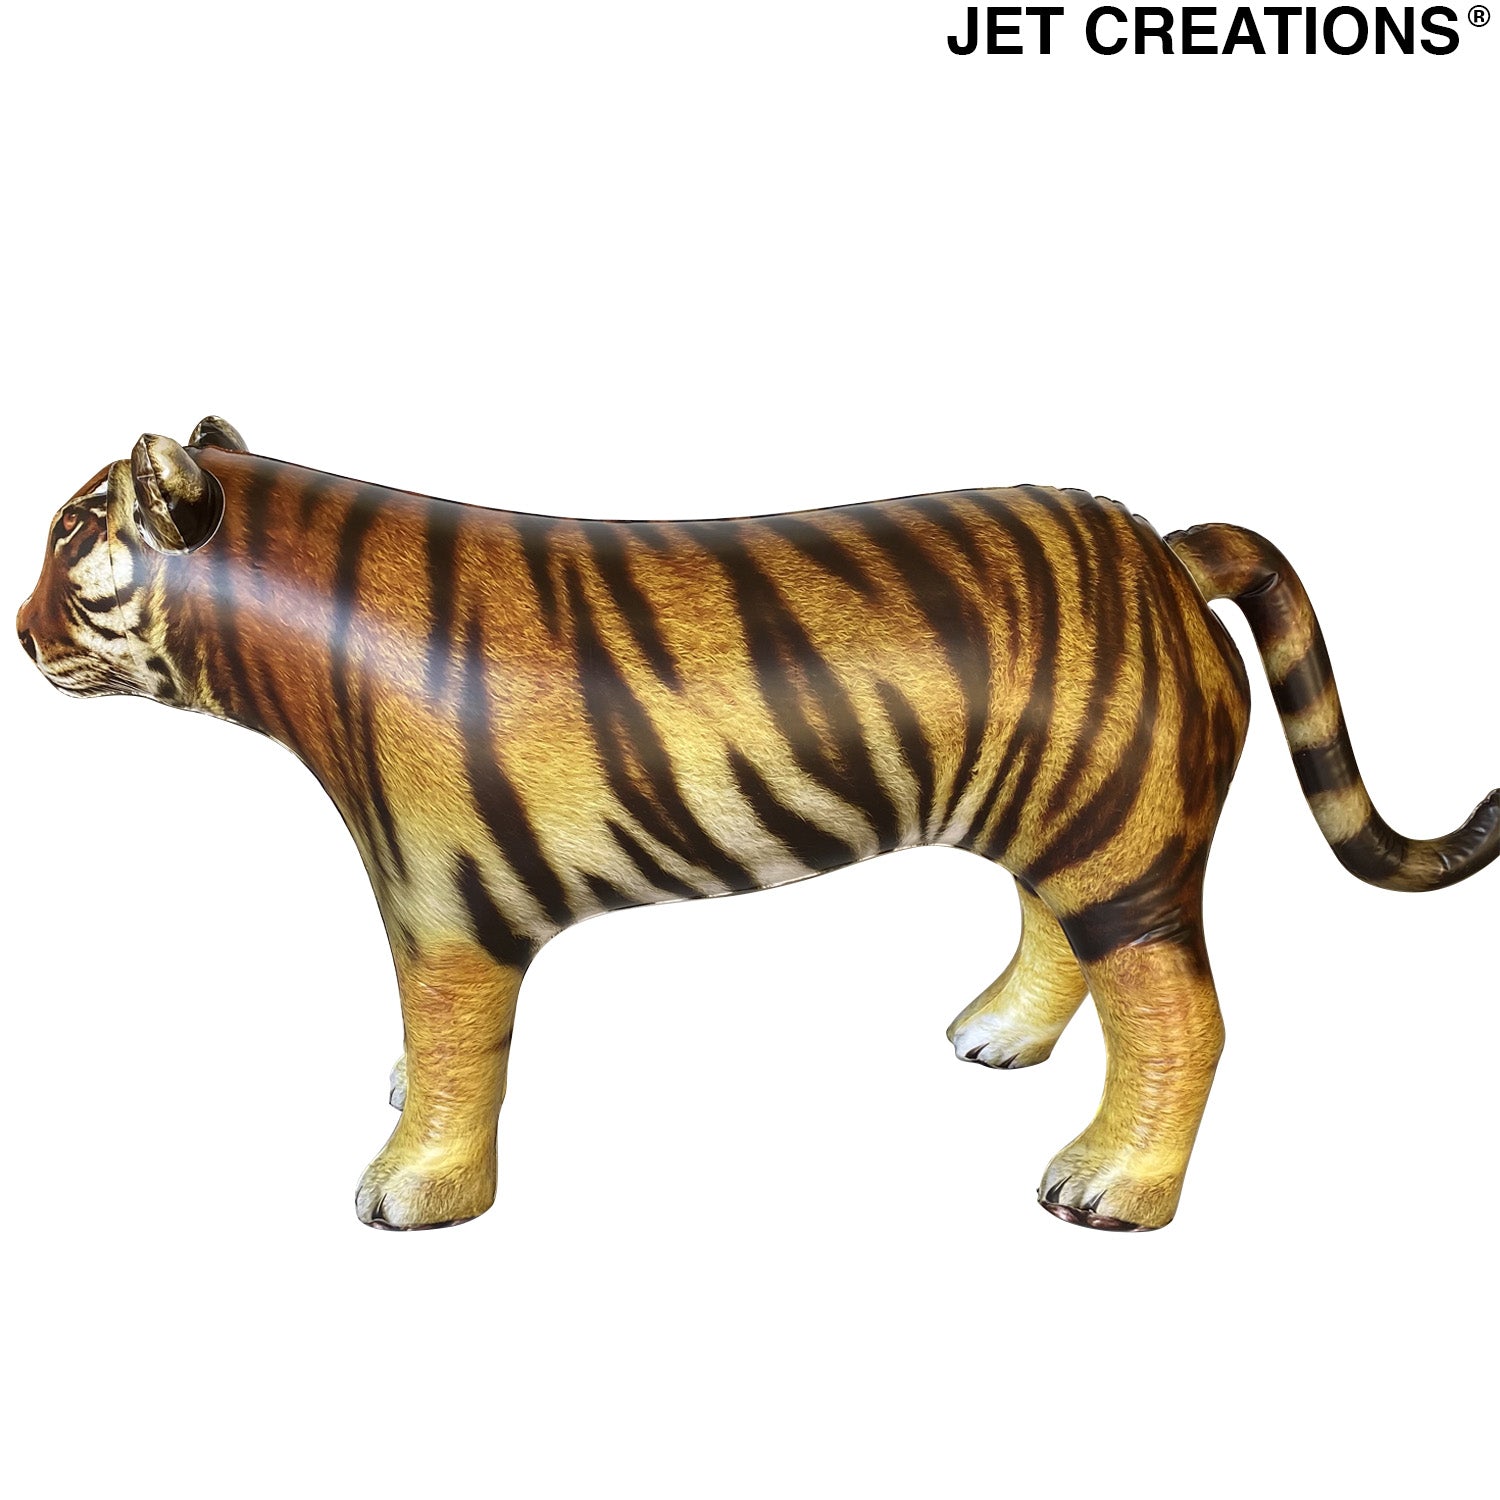 JET INFLATABLE TIGER - 40" Jet Creations Inc.